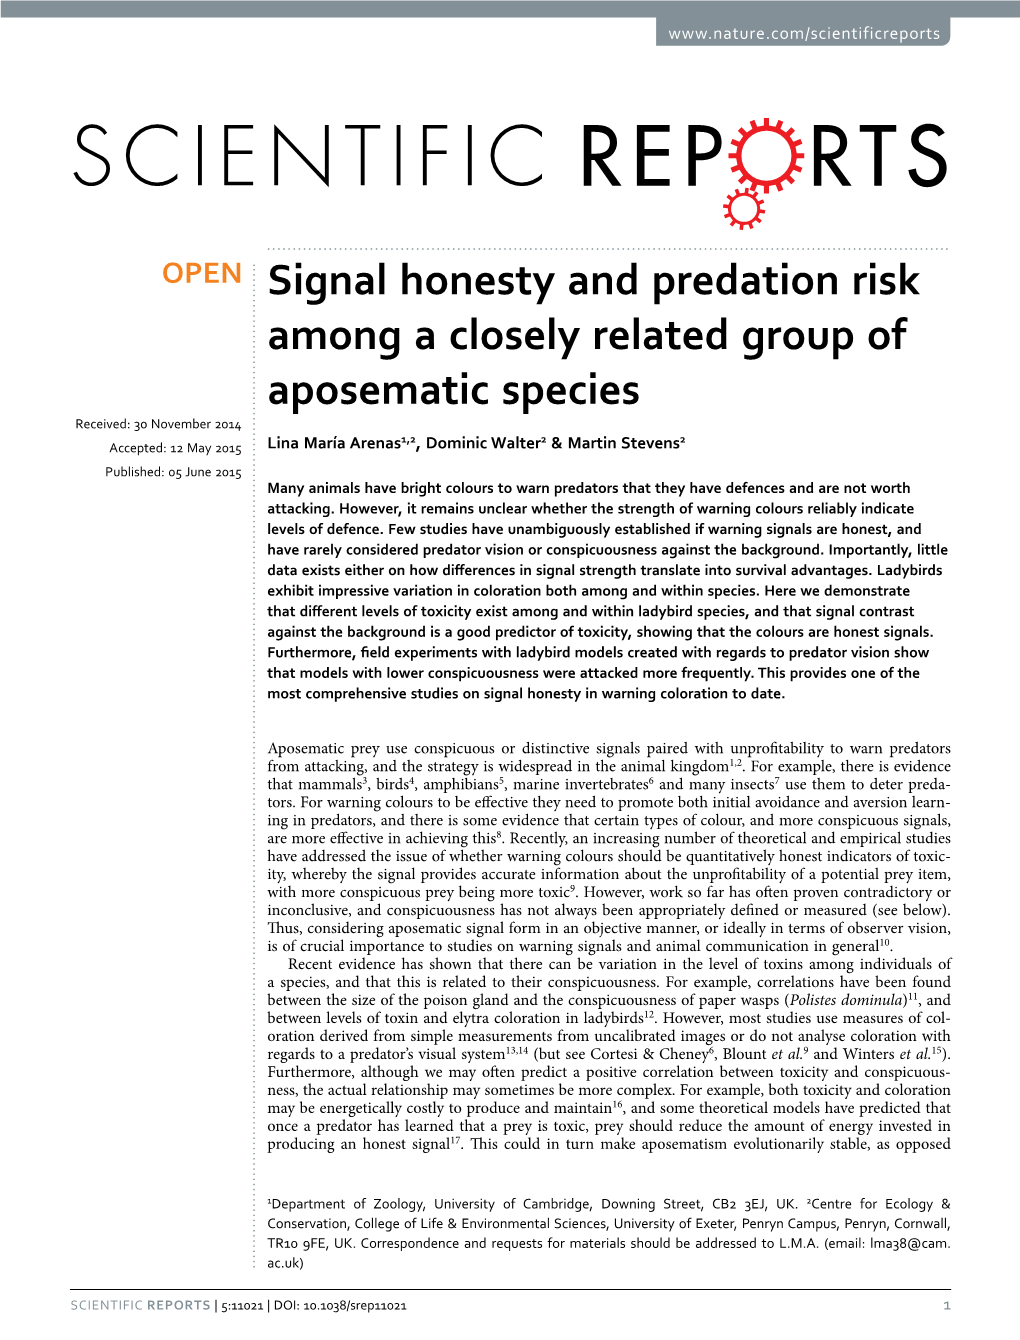 Signal Honesty and Predation Risk Among a Closely Related Group Of